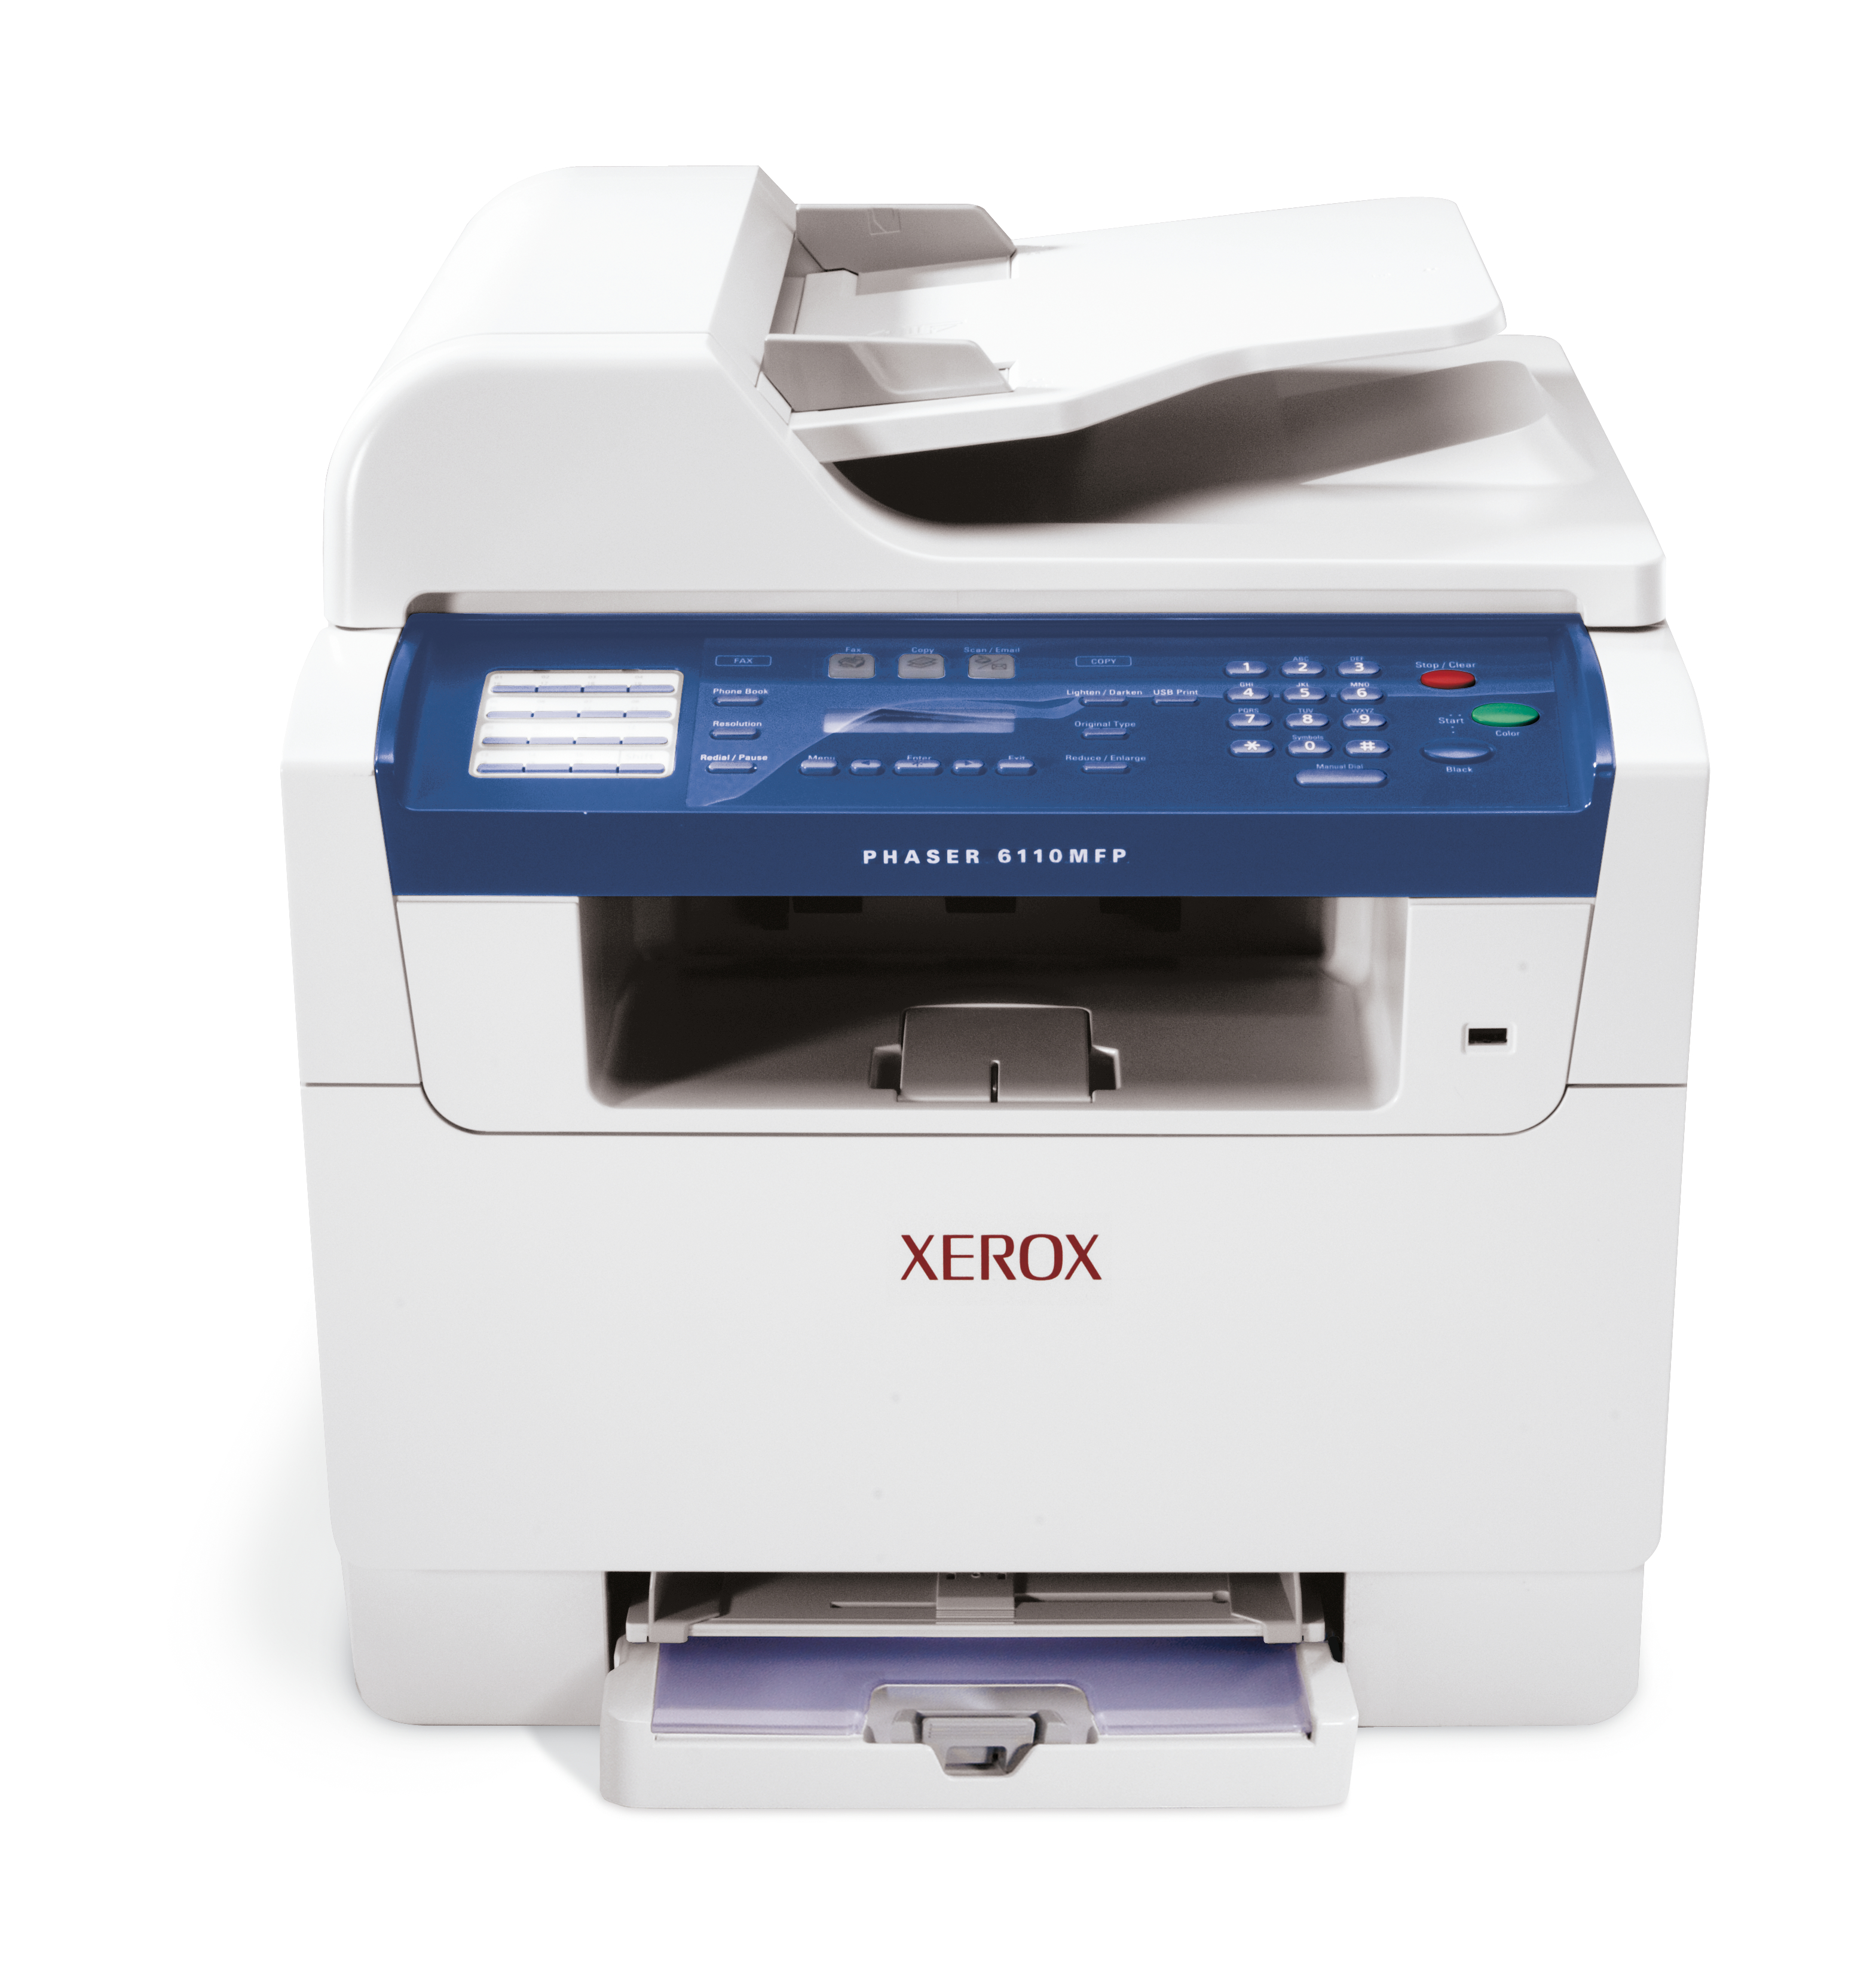 Xerox phaser 6560 driver for mac